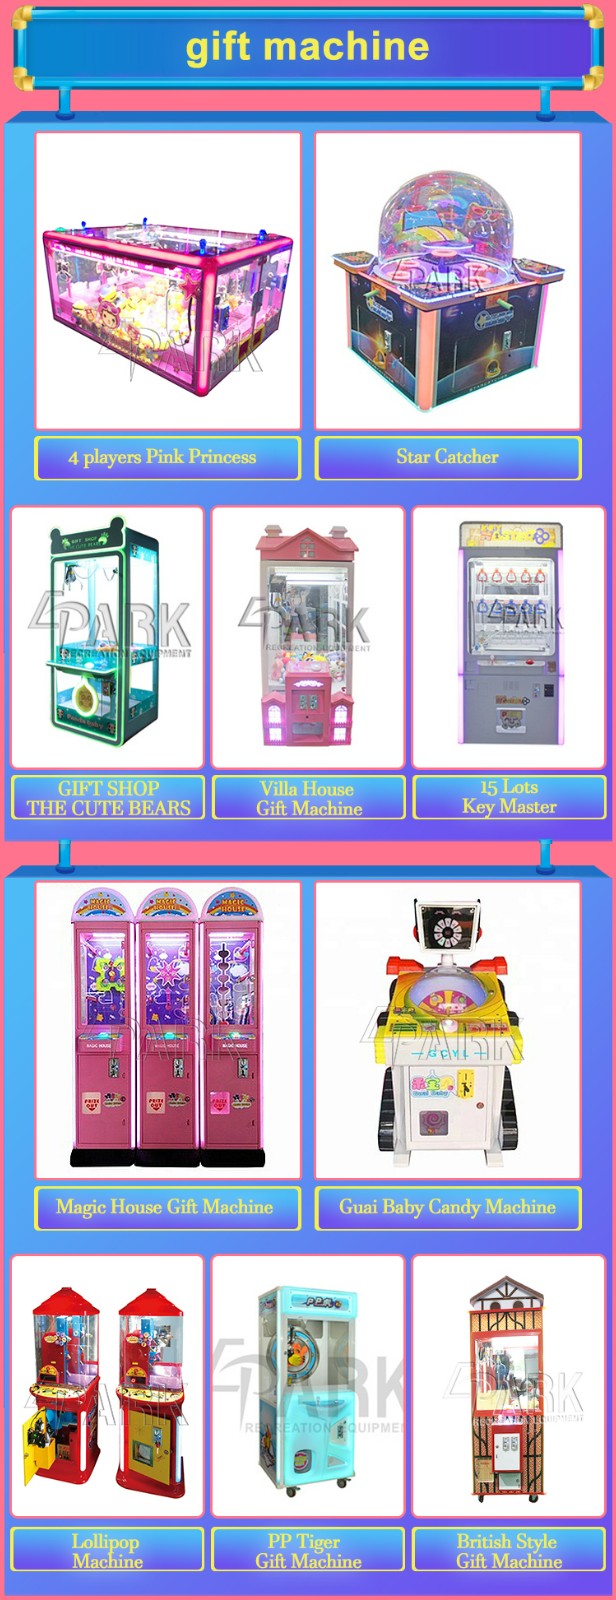 EPARK Mini Double Gift Machine coin pusher game machine video game machines earn money lottery ticket for sale